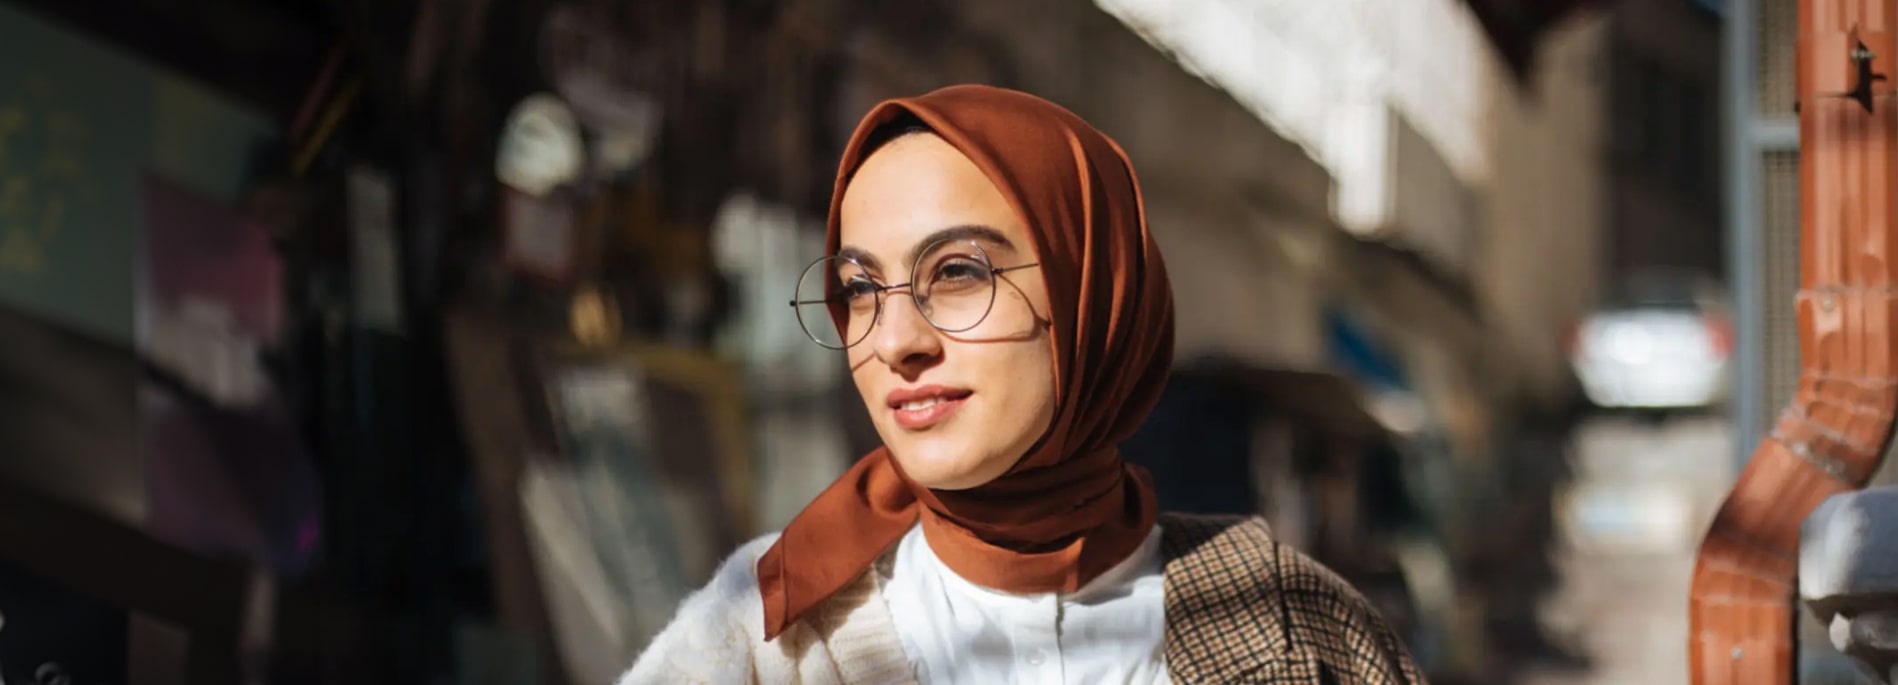 Woman wearing a brown hijab and metal glasses outdoors